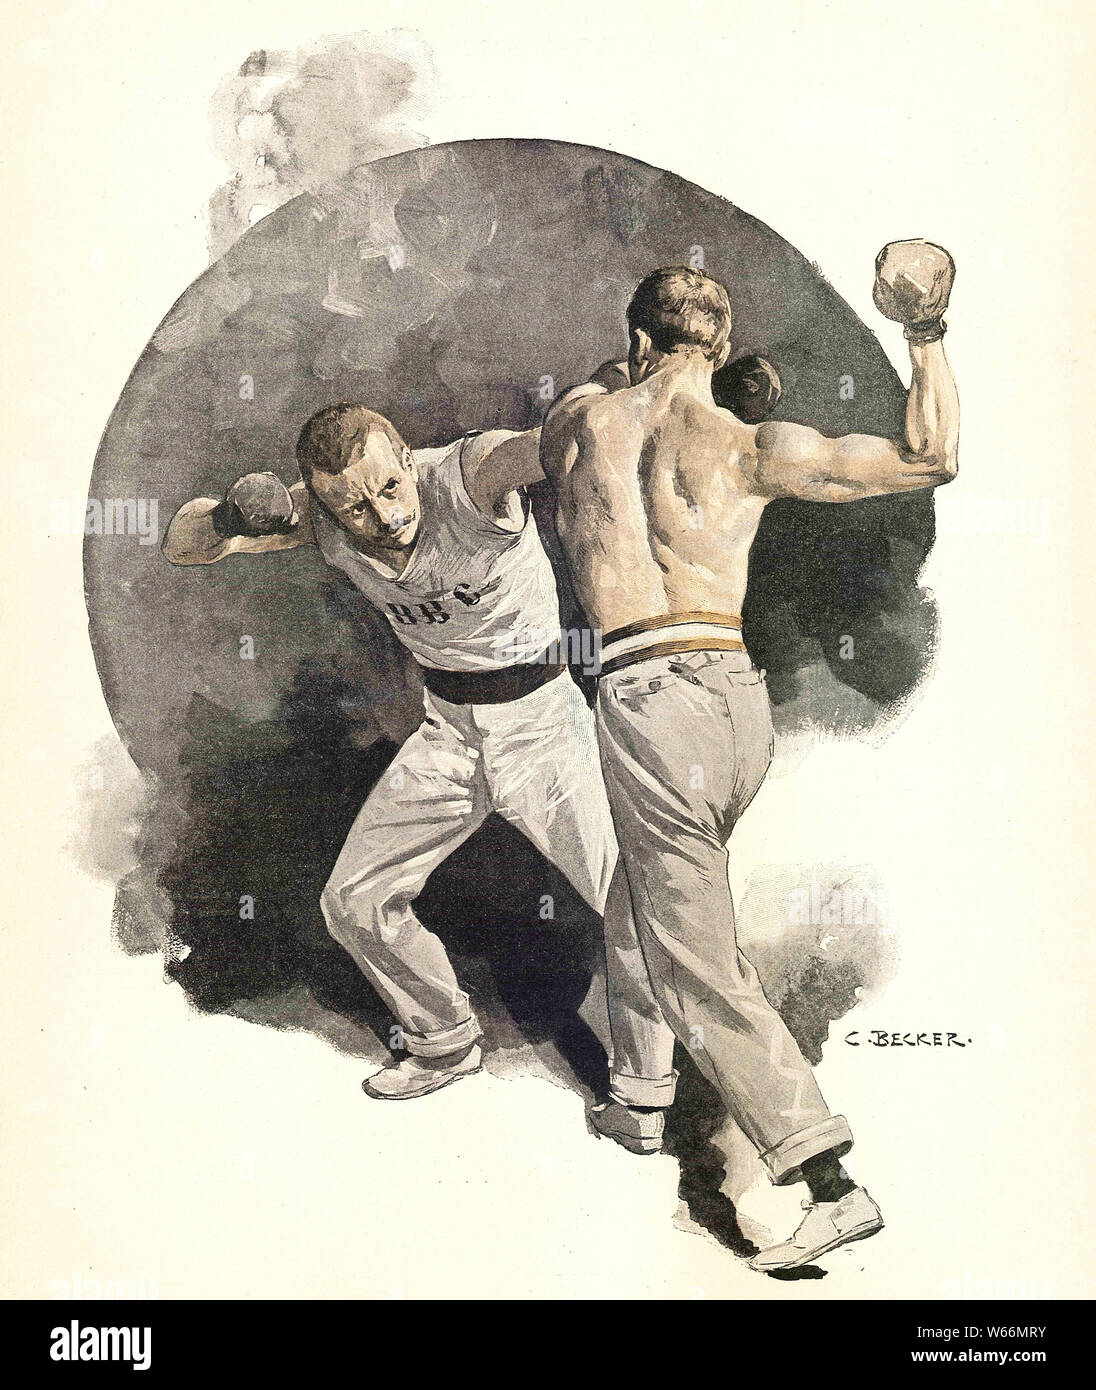 Two professional boxers are fighting, painted by C. Becker in the 19th century Stock Photo